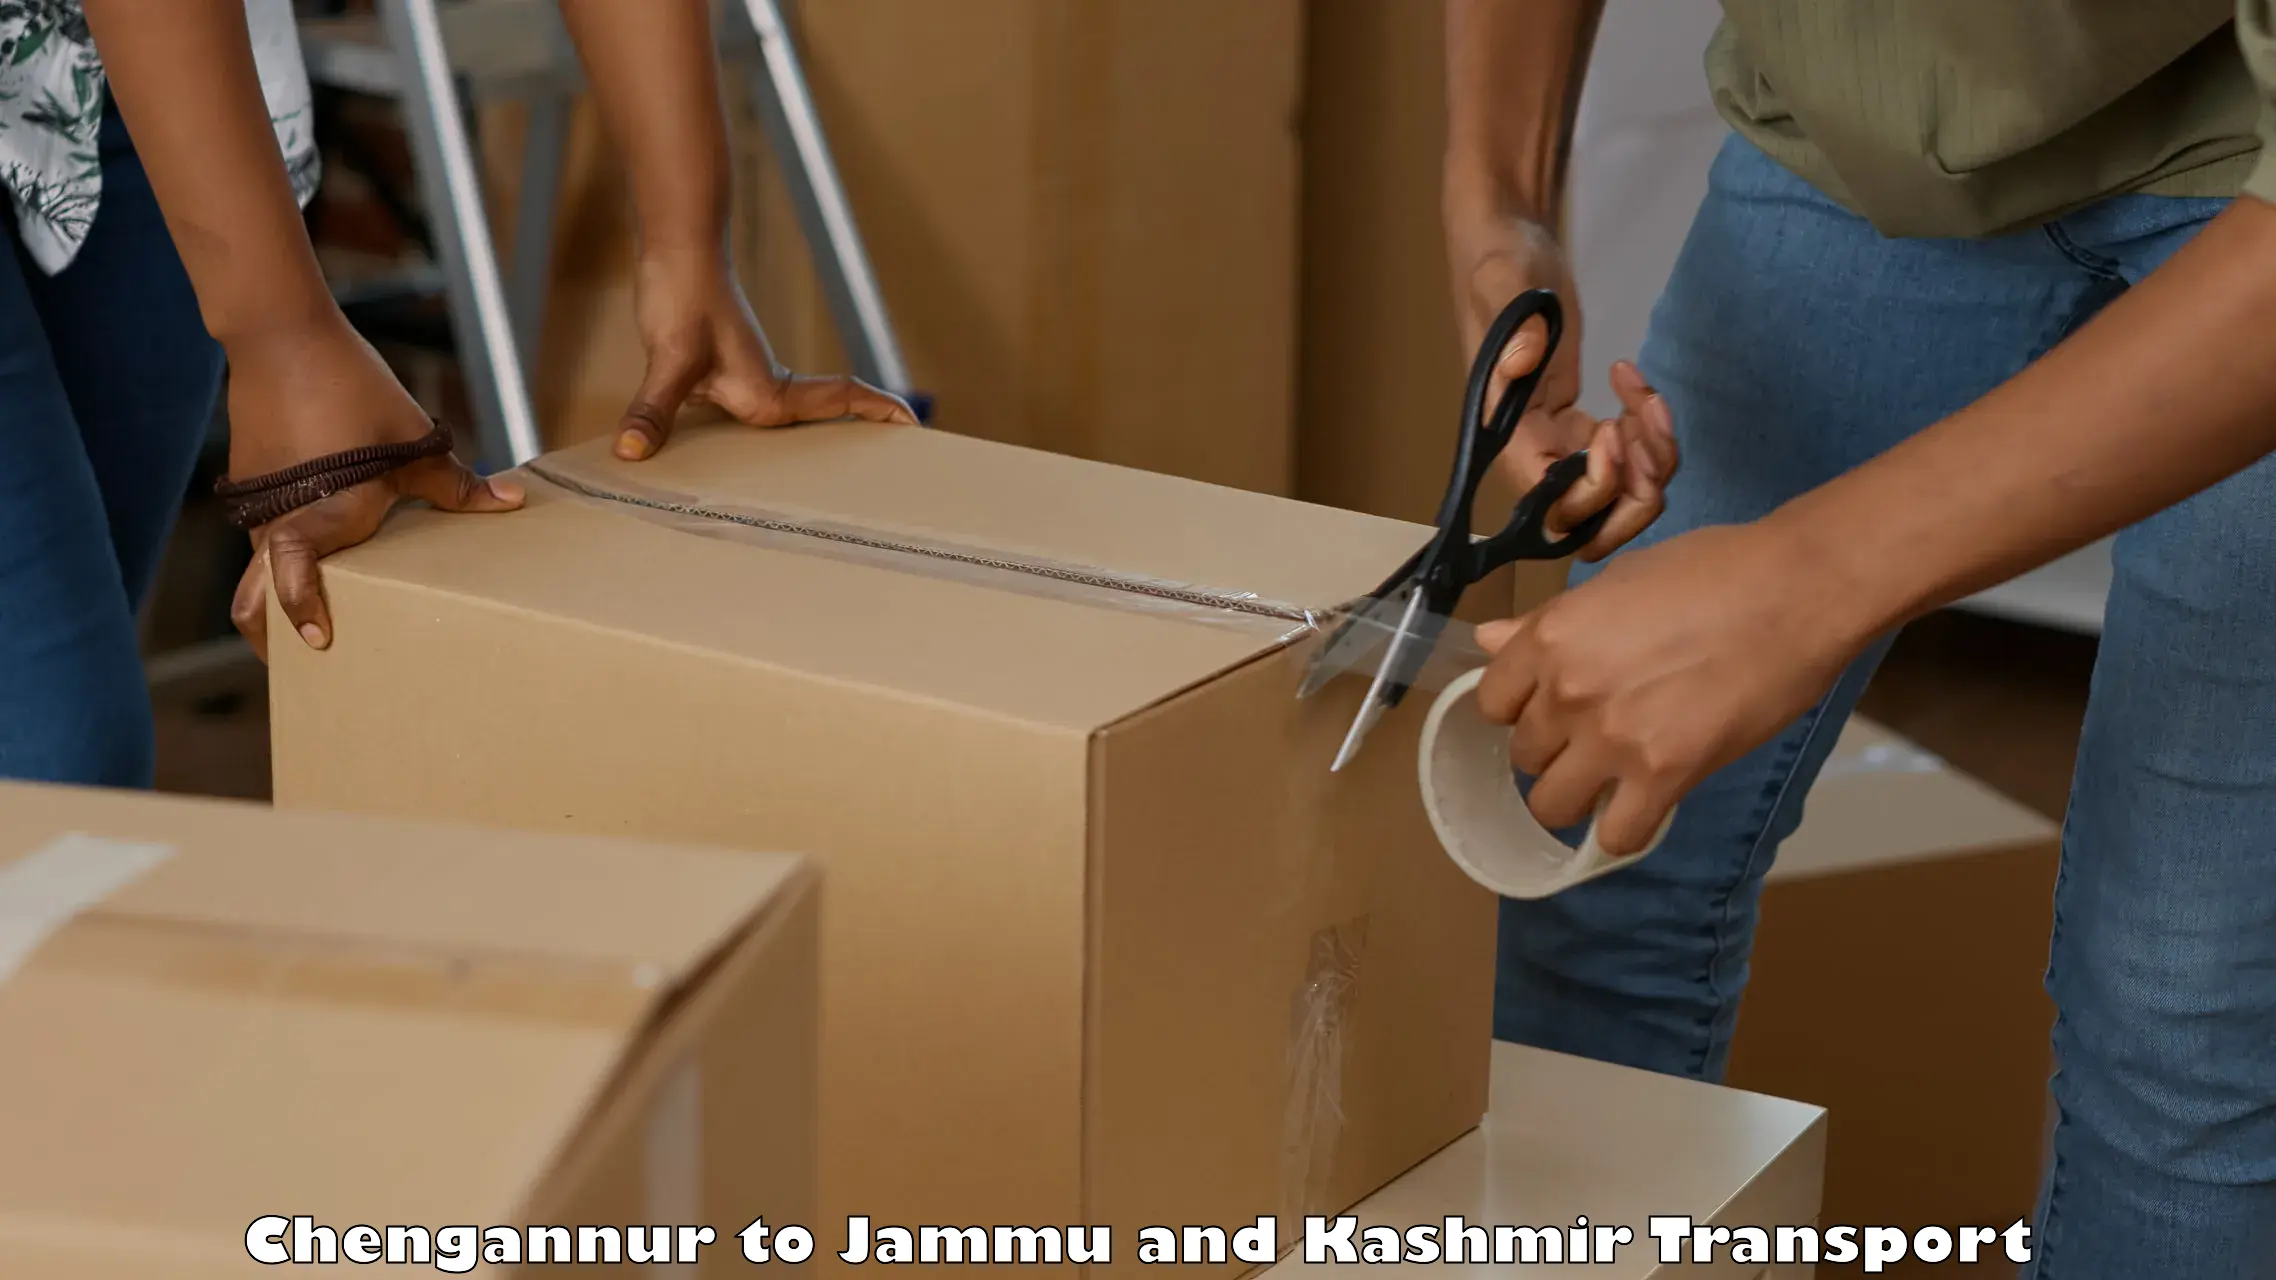 Nationwide transport services Chengannur to Baramulla